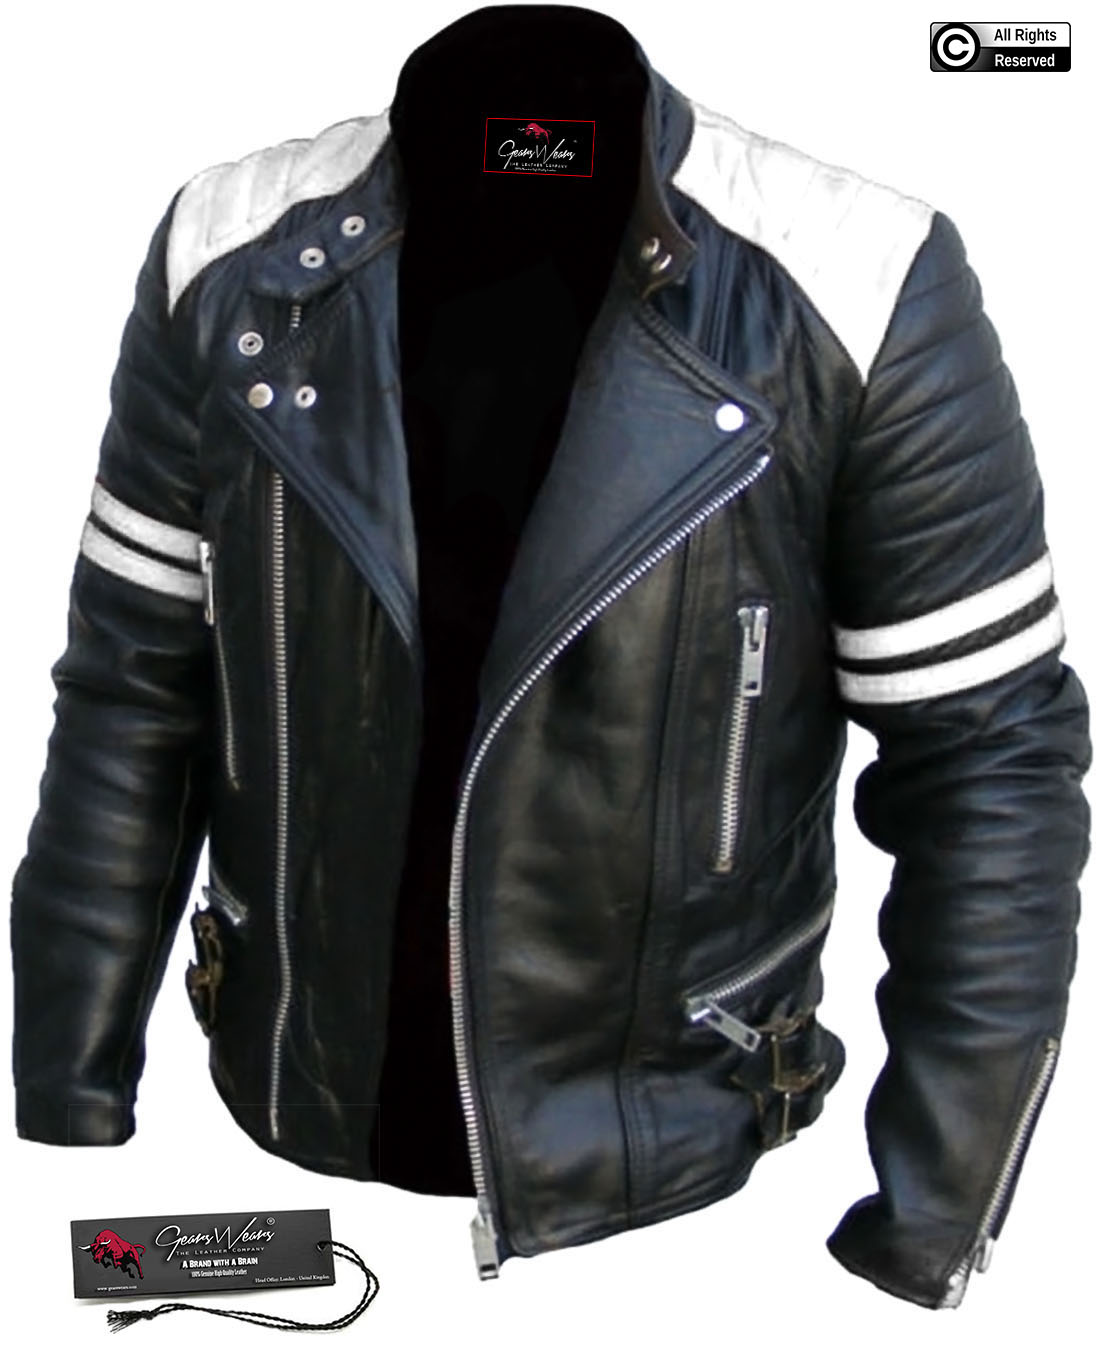 Gearswears Red Color Men's Leather Jacket made with Genuine